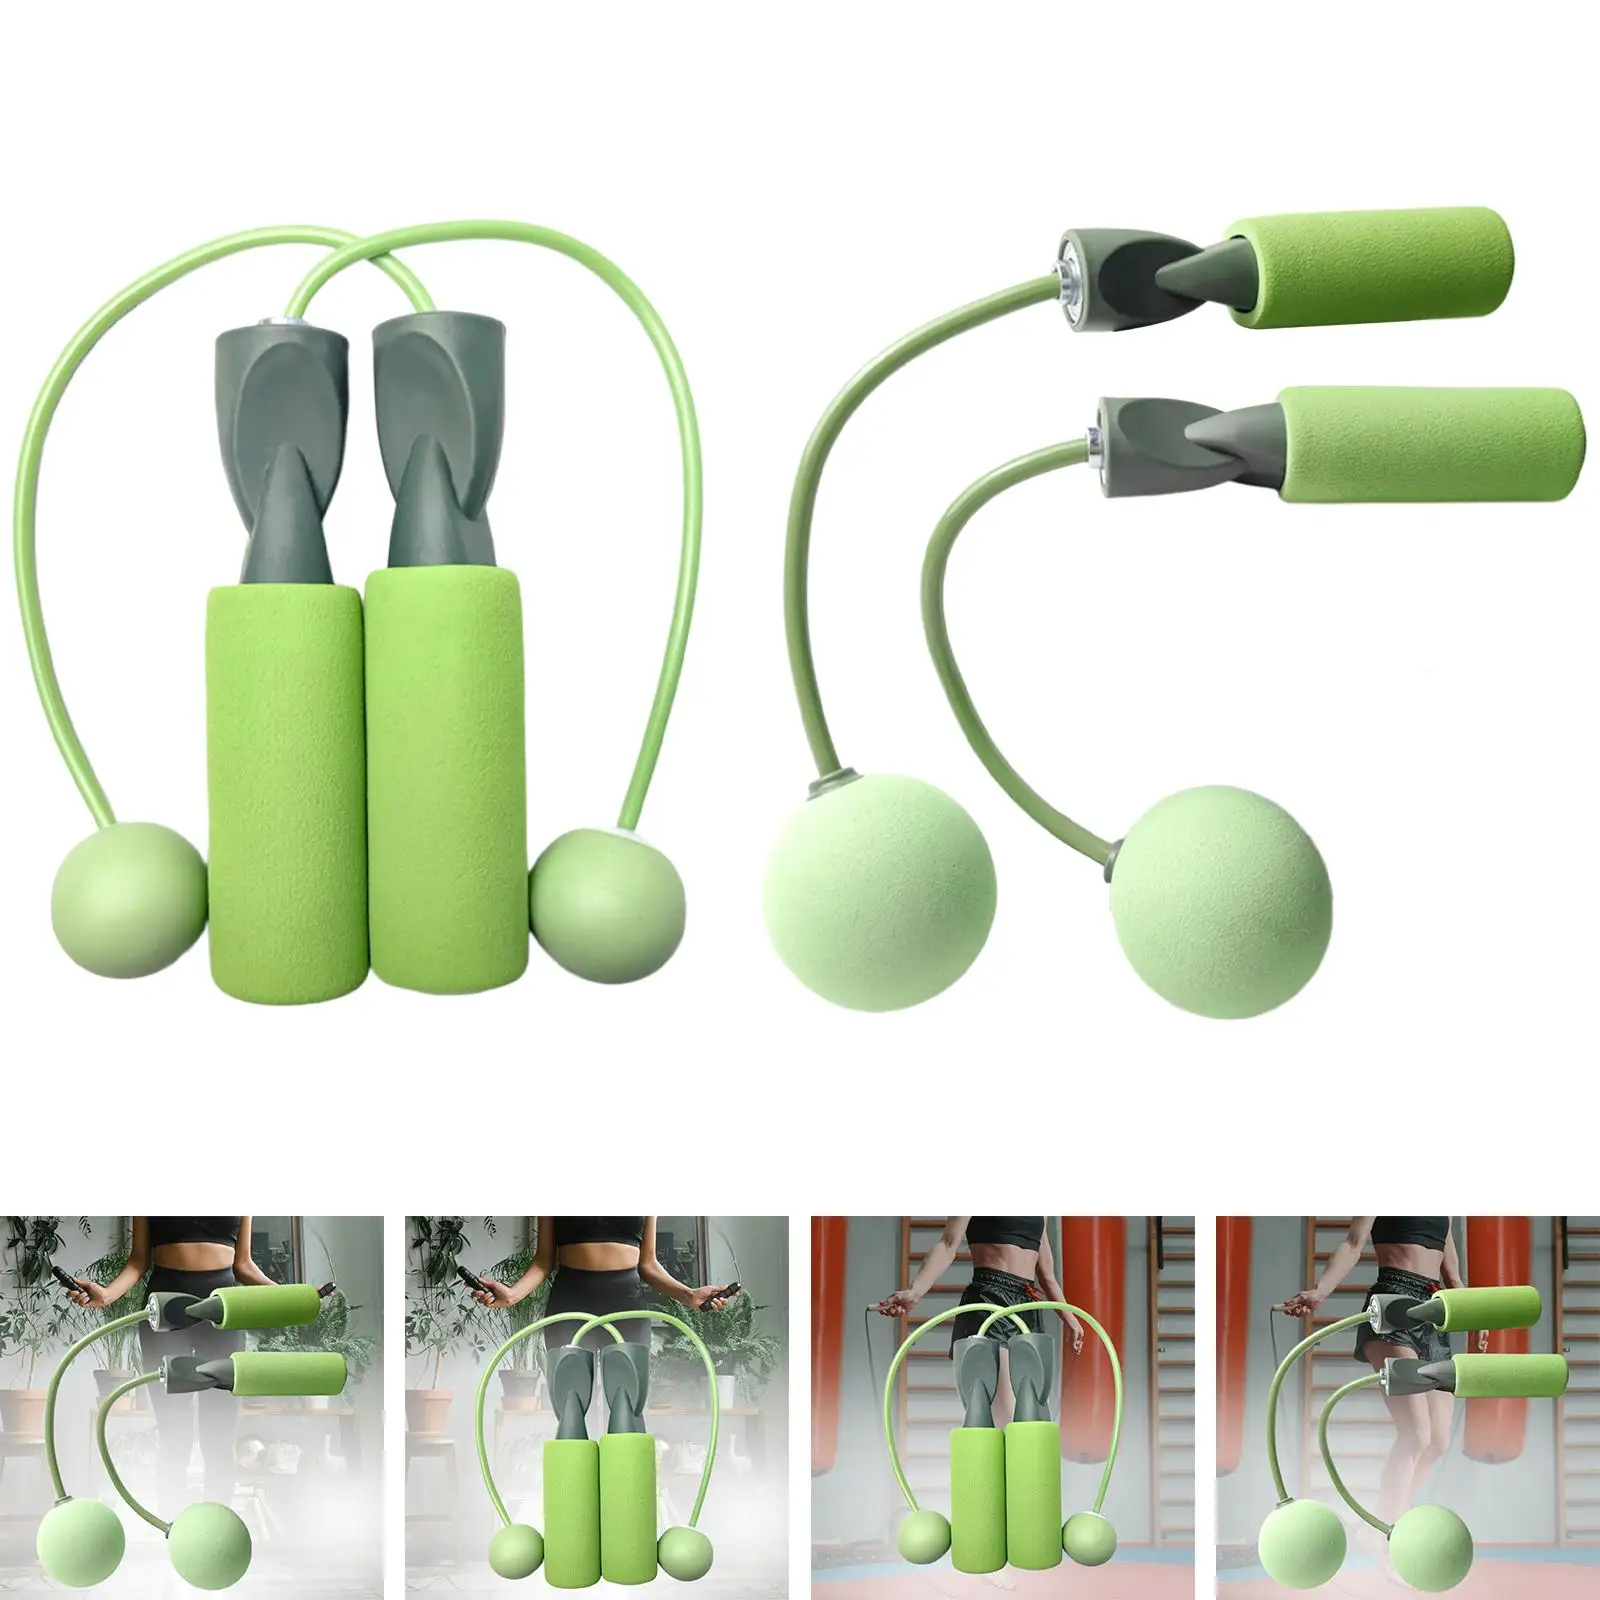 Cordless Skipping Rope Weighted Heavy Duty Cordless Skipping Rope with Memory